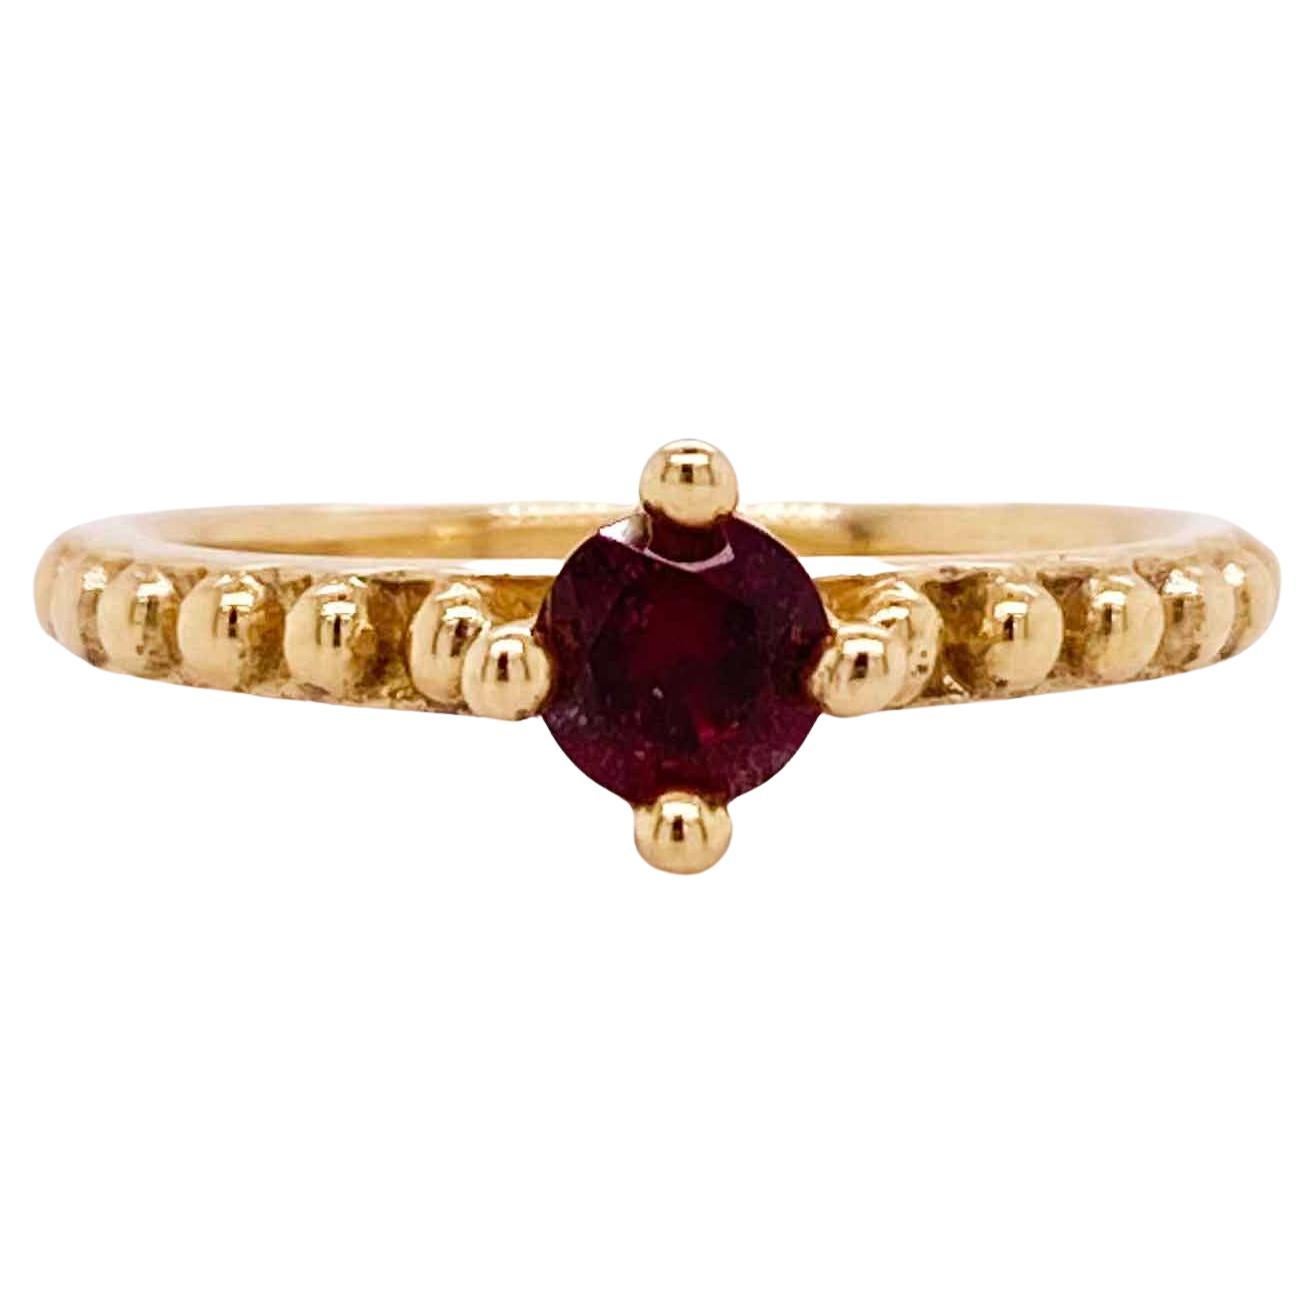 For Sale:  Garnet Solitaire Ring, Yellow Gold, Beaded Band, .45 Carat Round Garnet